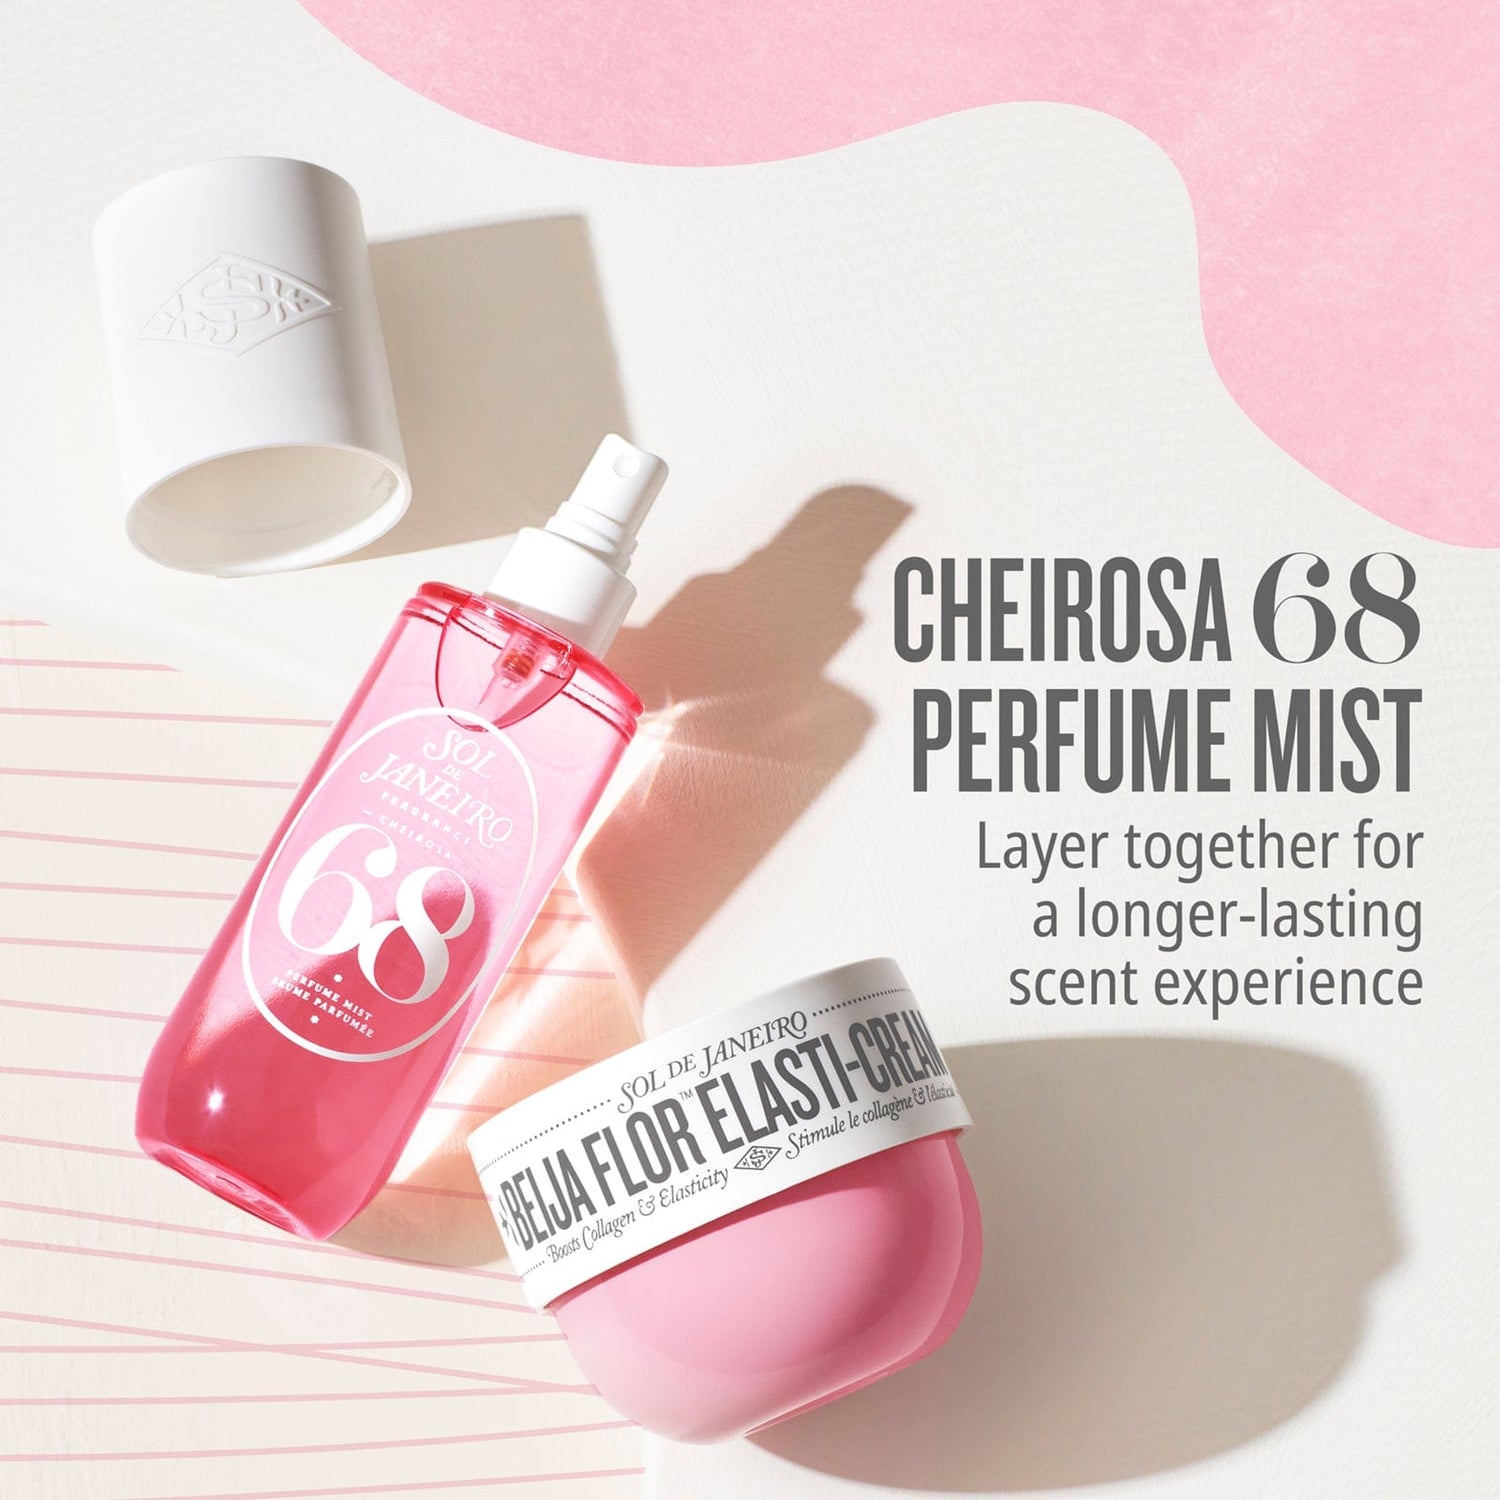 Cheirosa 68 perfume mist - layer together for a longer-lasting scent experience